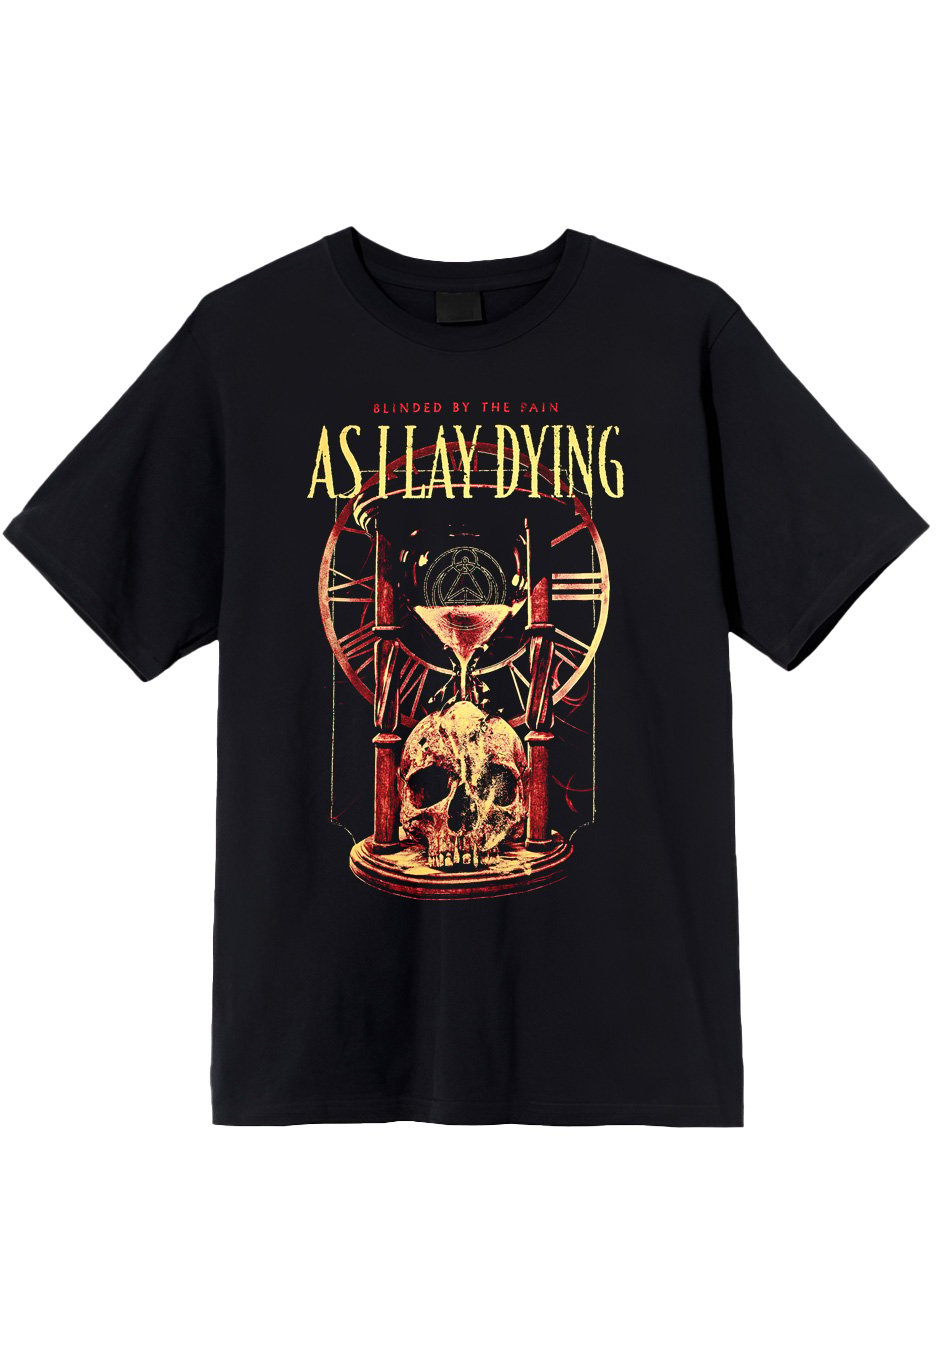 As I Lay Dying - Blinded By The Pain - T-Shirt